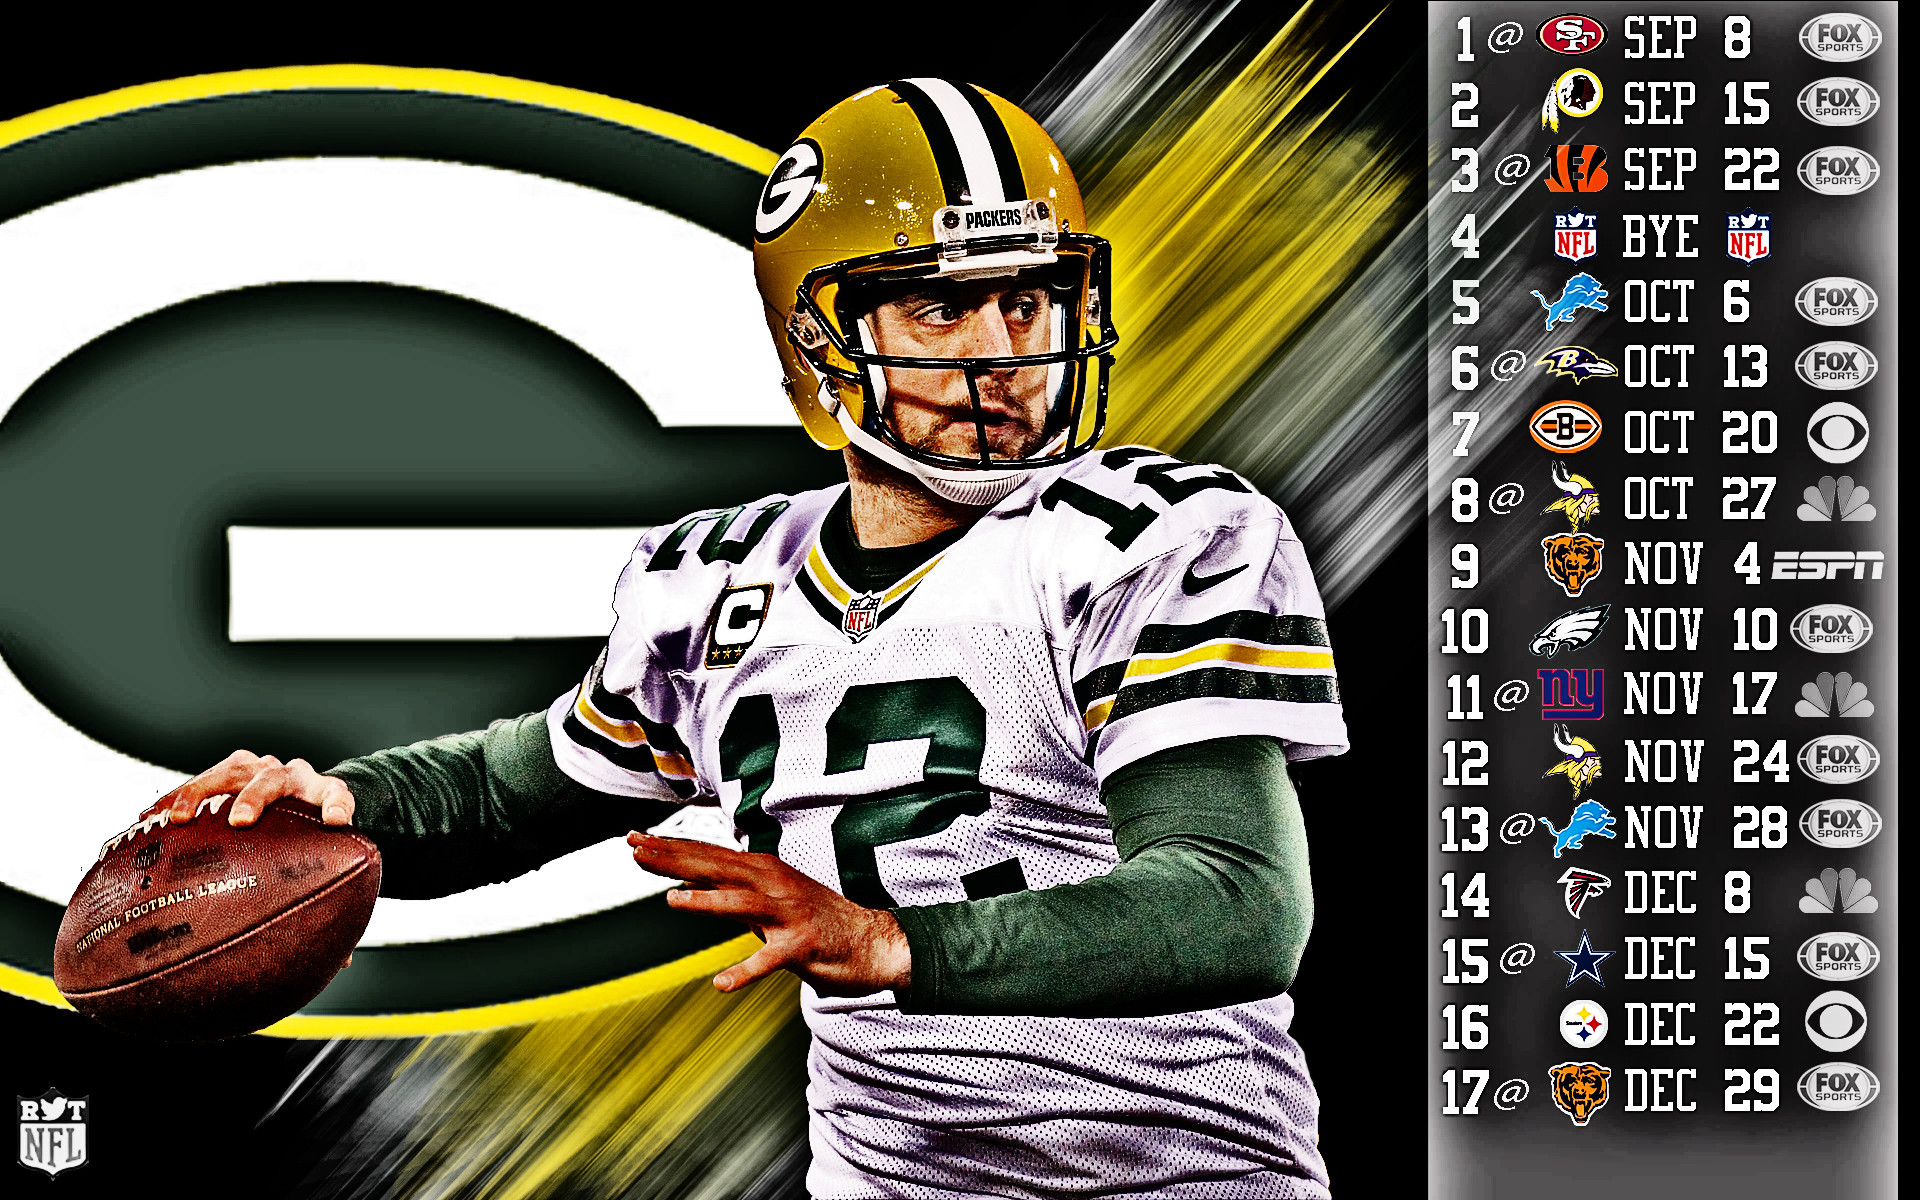 1920x1200 Green Bay Packers. Aaron Rodgers 2013 Schedule HDR ...